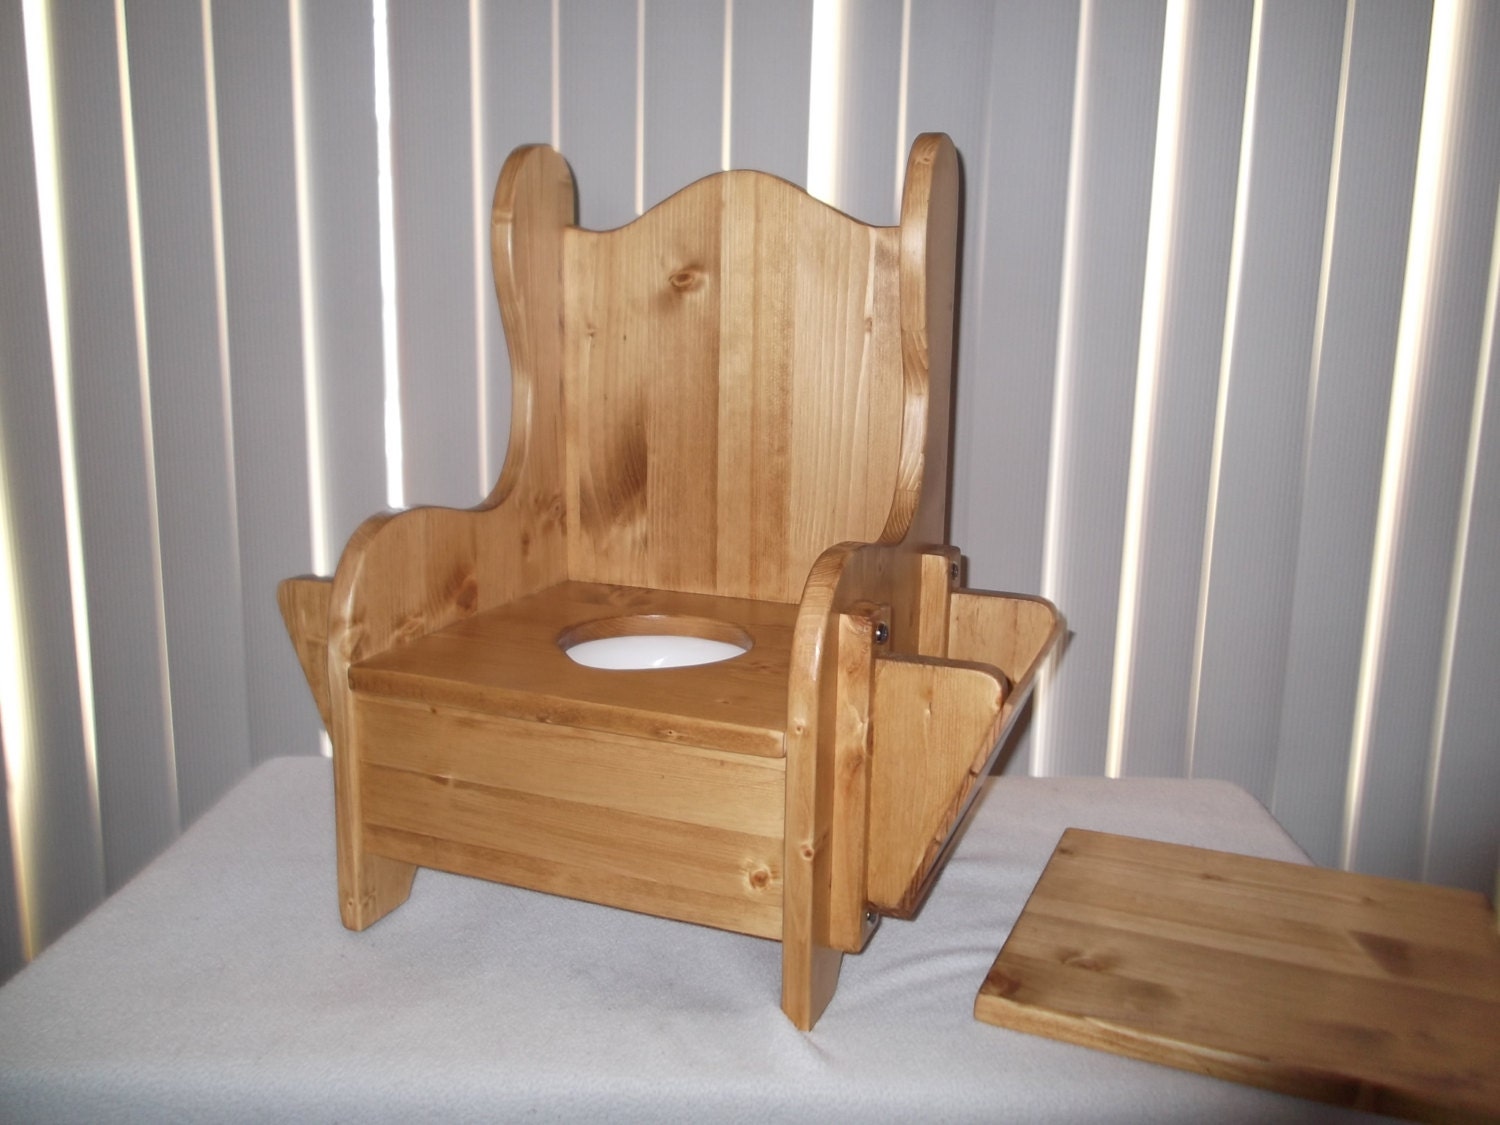 Wooden Potty Chair W Tp Holder And Book Rack Etsy